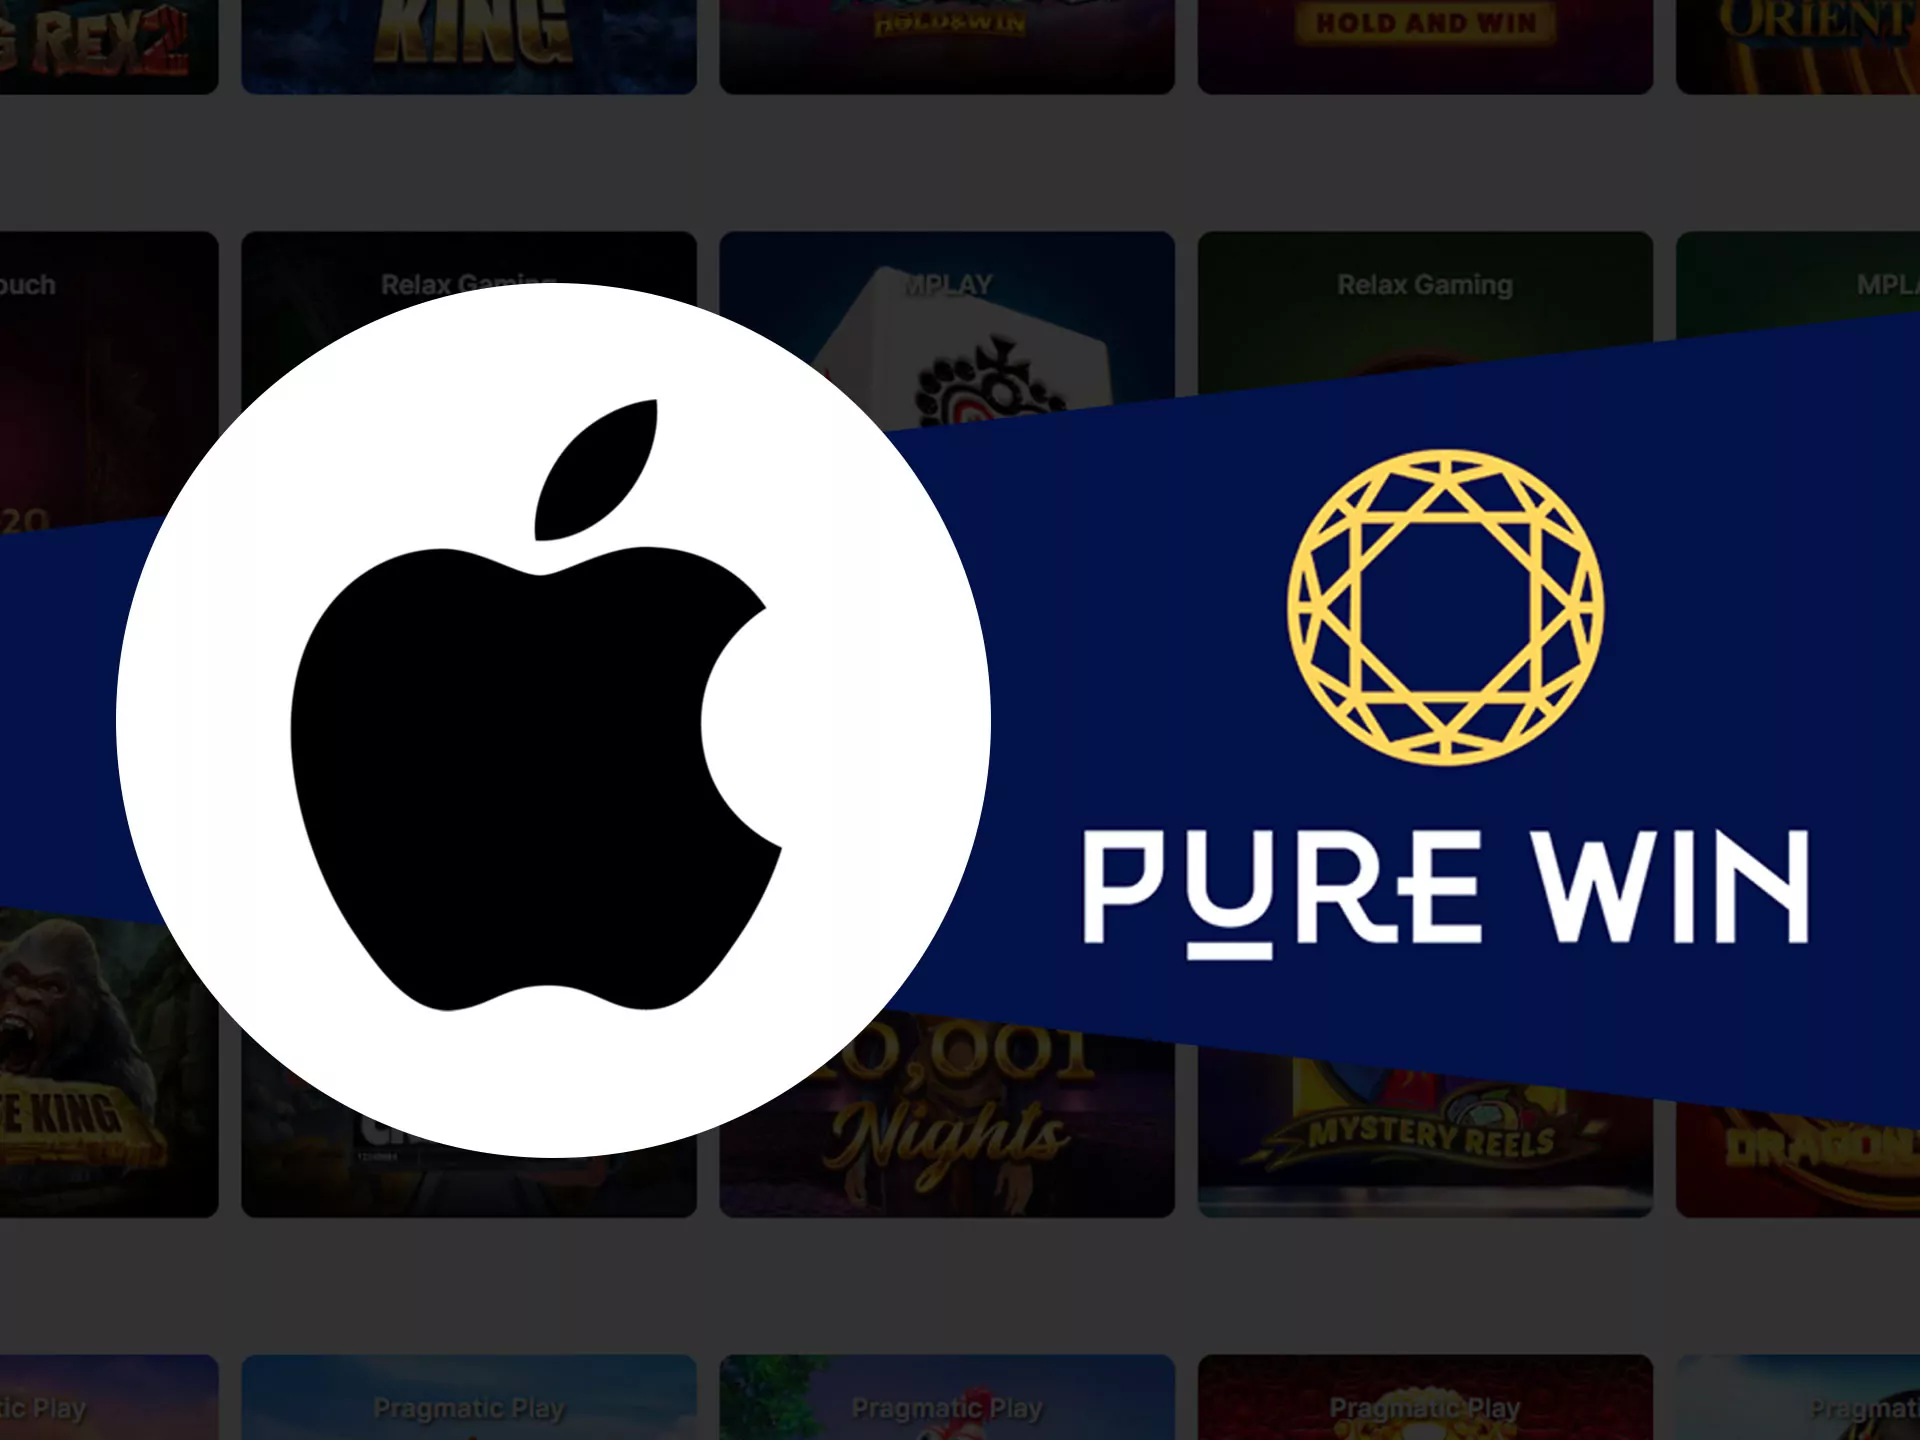 Pure Win have app on iOS devices.